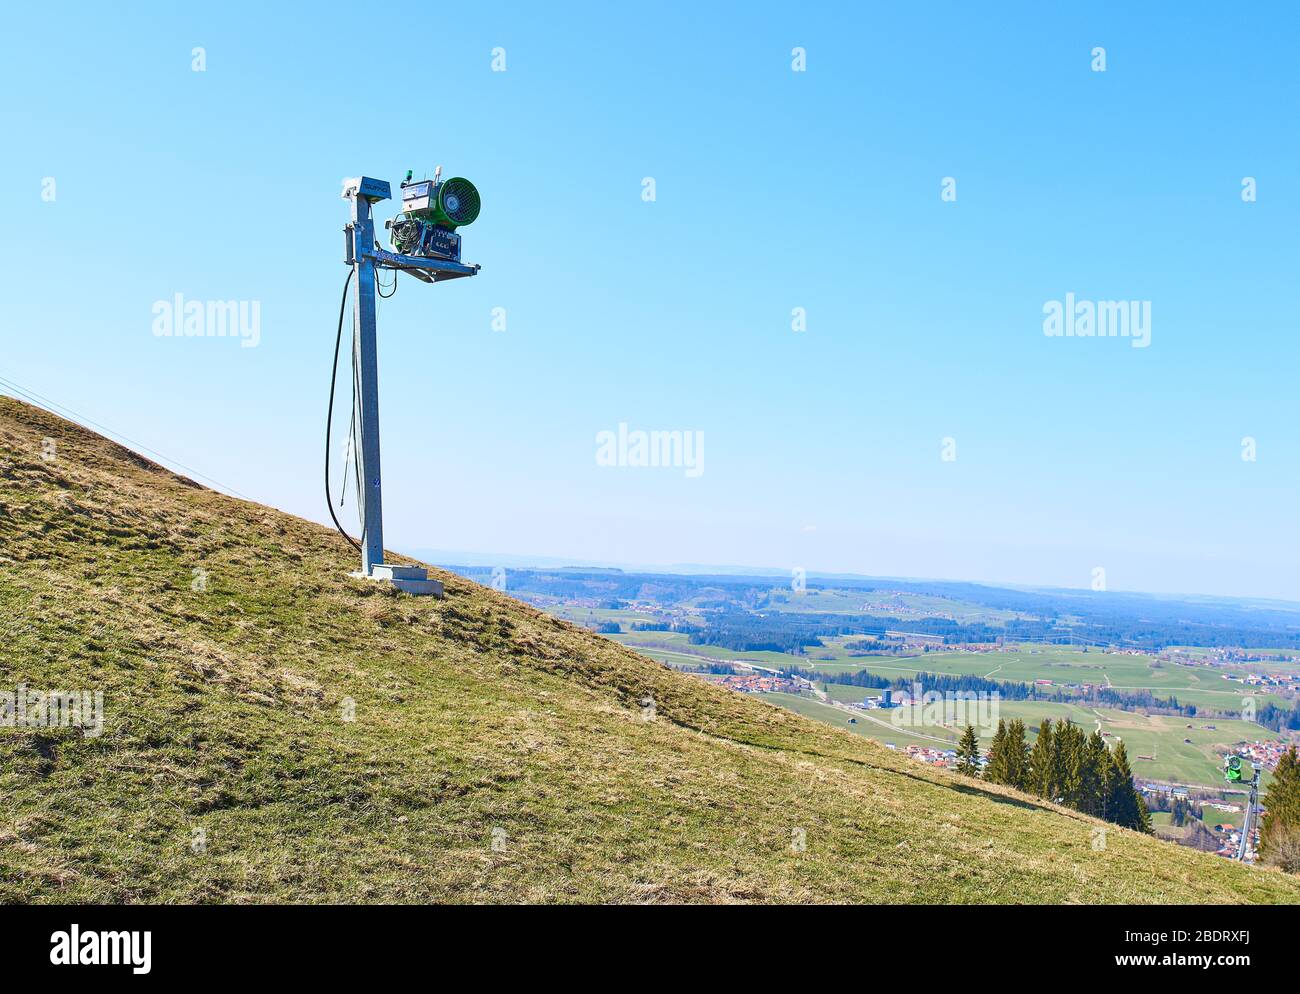 Nesselwang, Germany, April 08, 2020. A snow cannon in spring time in the Alpspitzbahn ski arena   on April 08, 2020 in Nesselwang, Germany. © Peter Schatz / Alamy Live News Stock Photo